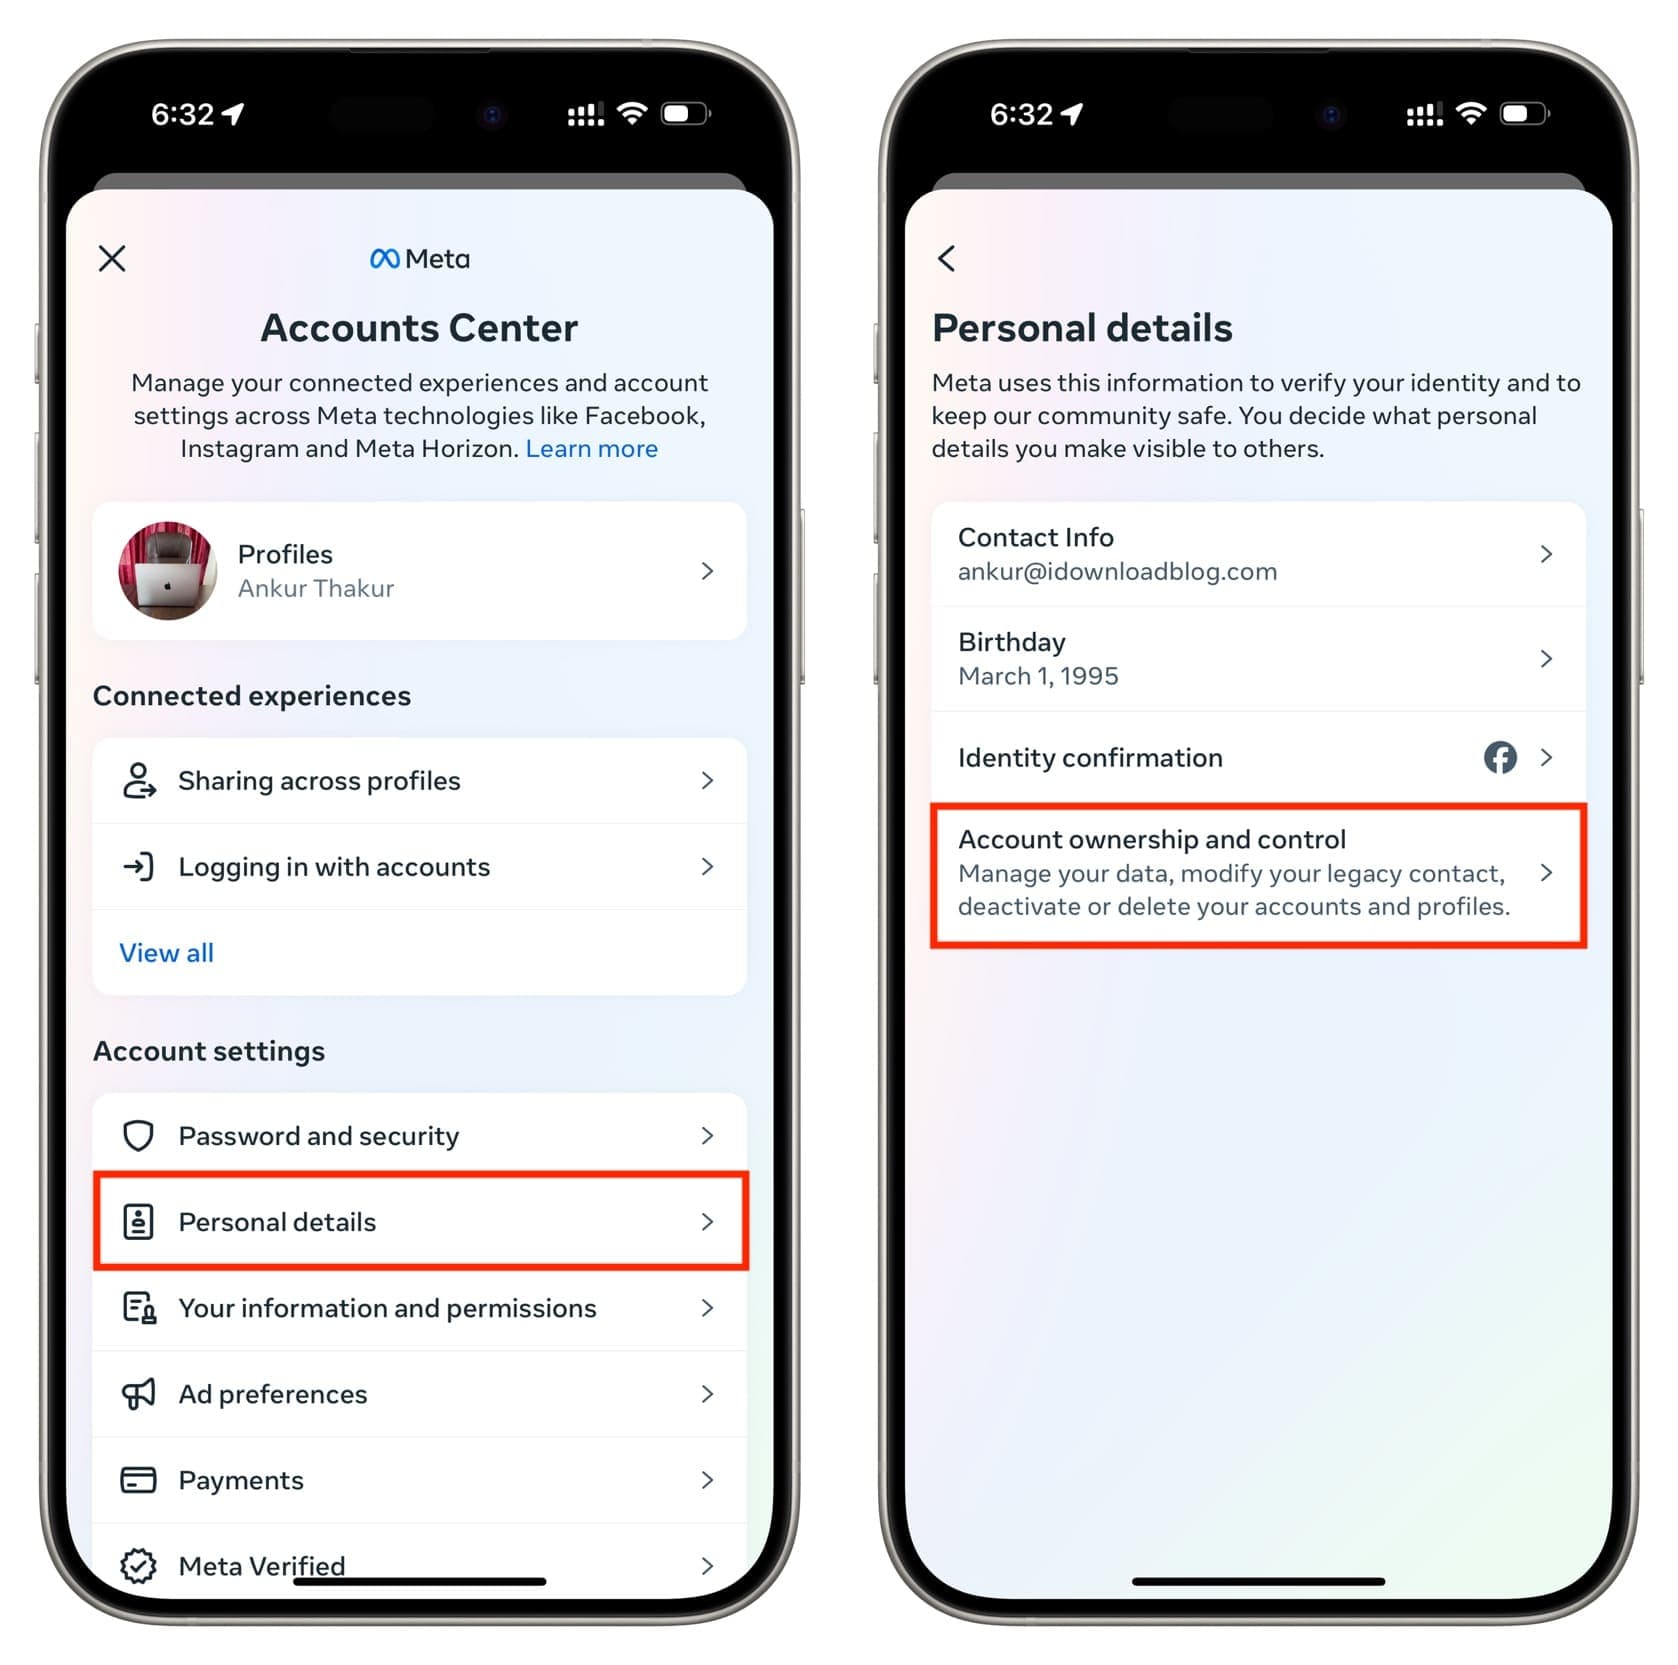 Tap Account ownership and control in Facebook app